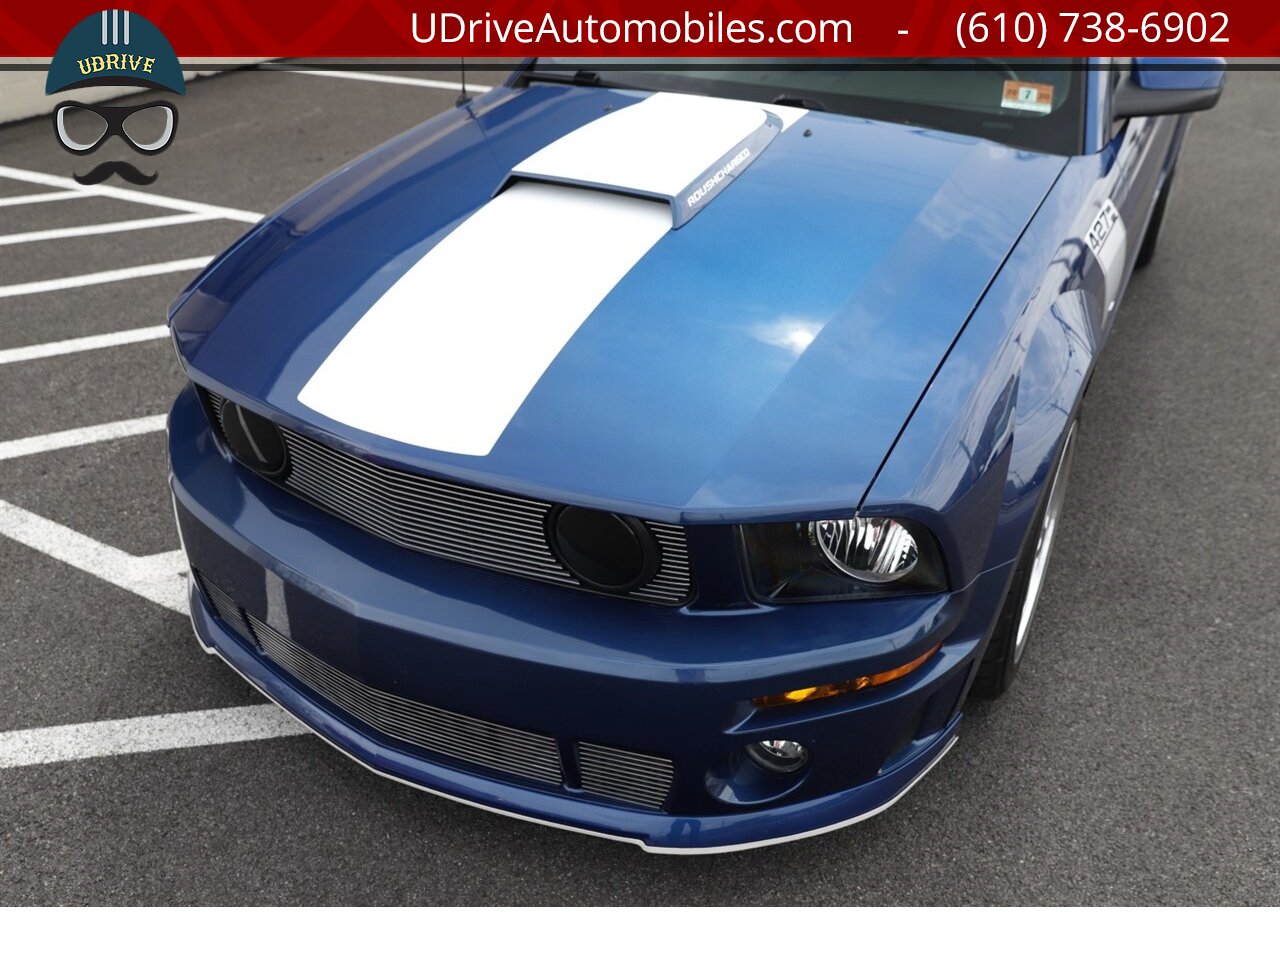 2007 Ford Mustang GT Roush 427R 22k Miles Vista Blue 2 Tone Seats   - Photo 10 - West Chester, PA 19382